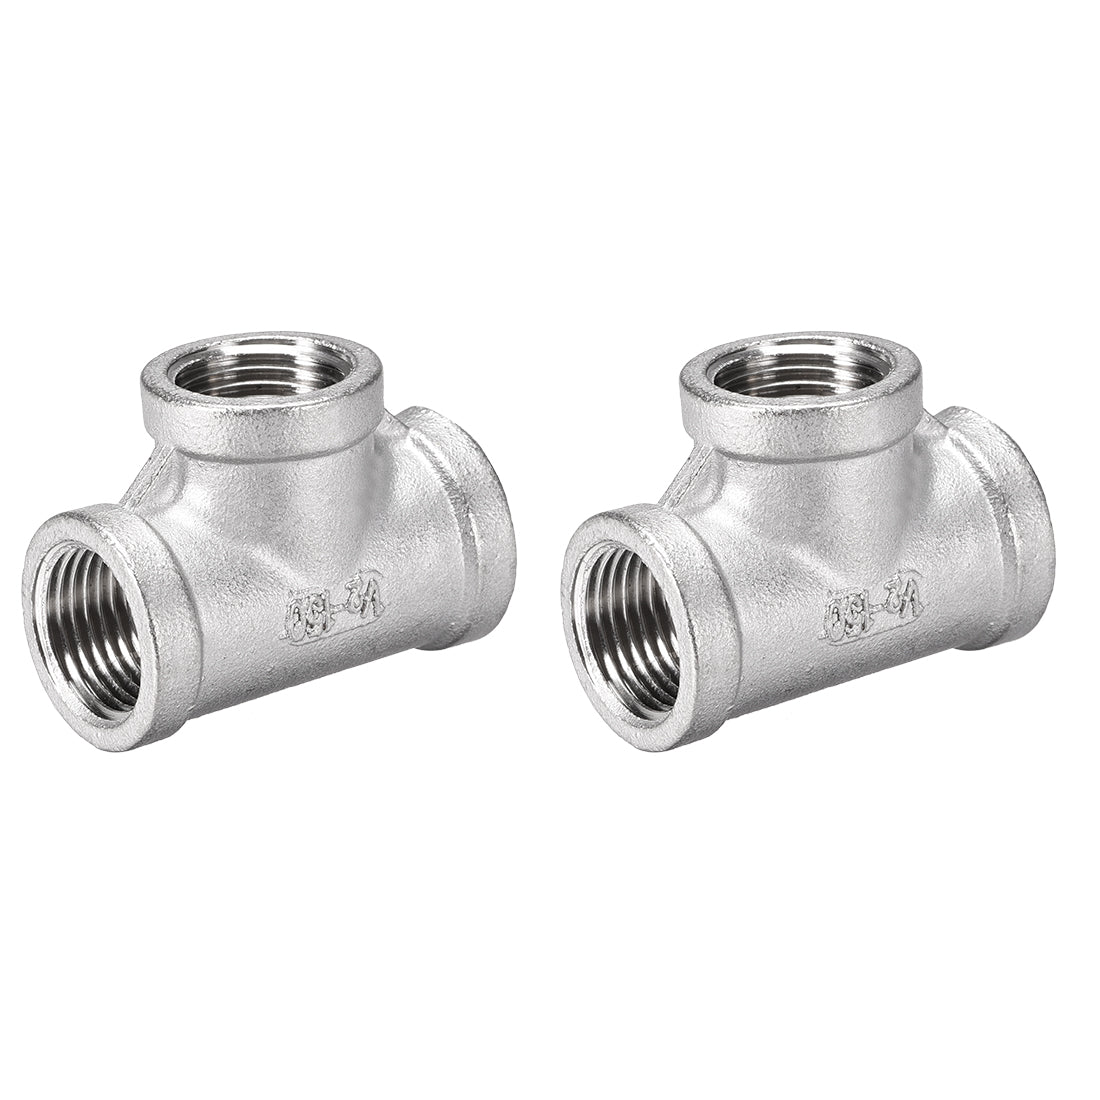 uxcell Uxcell Stainless Steel 304 Cast  Pipe Fitting 1/2BSPT Female Thread Class 150 Tee Shaped Connector Coupler 2pcs